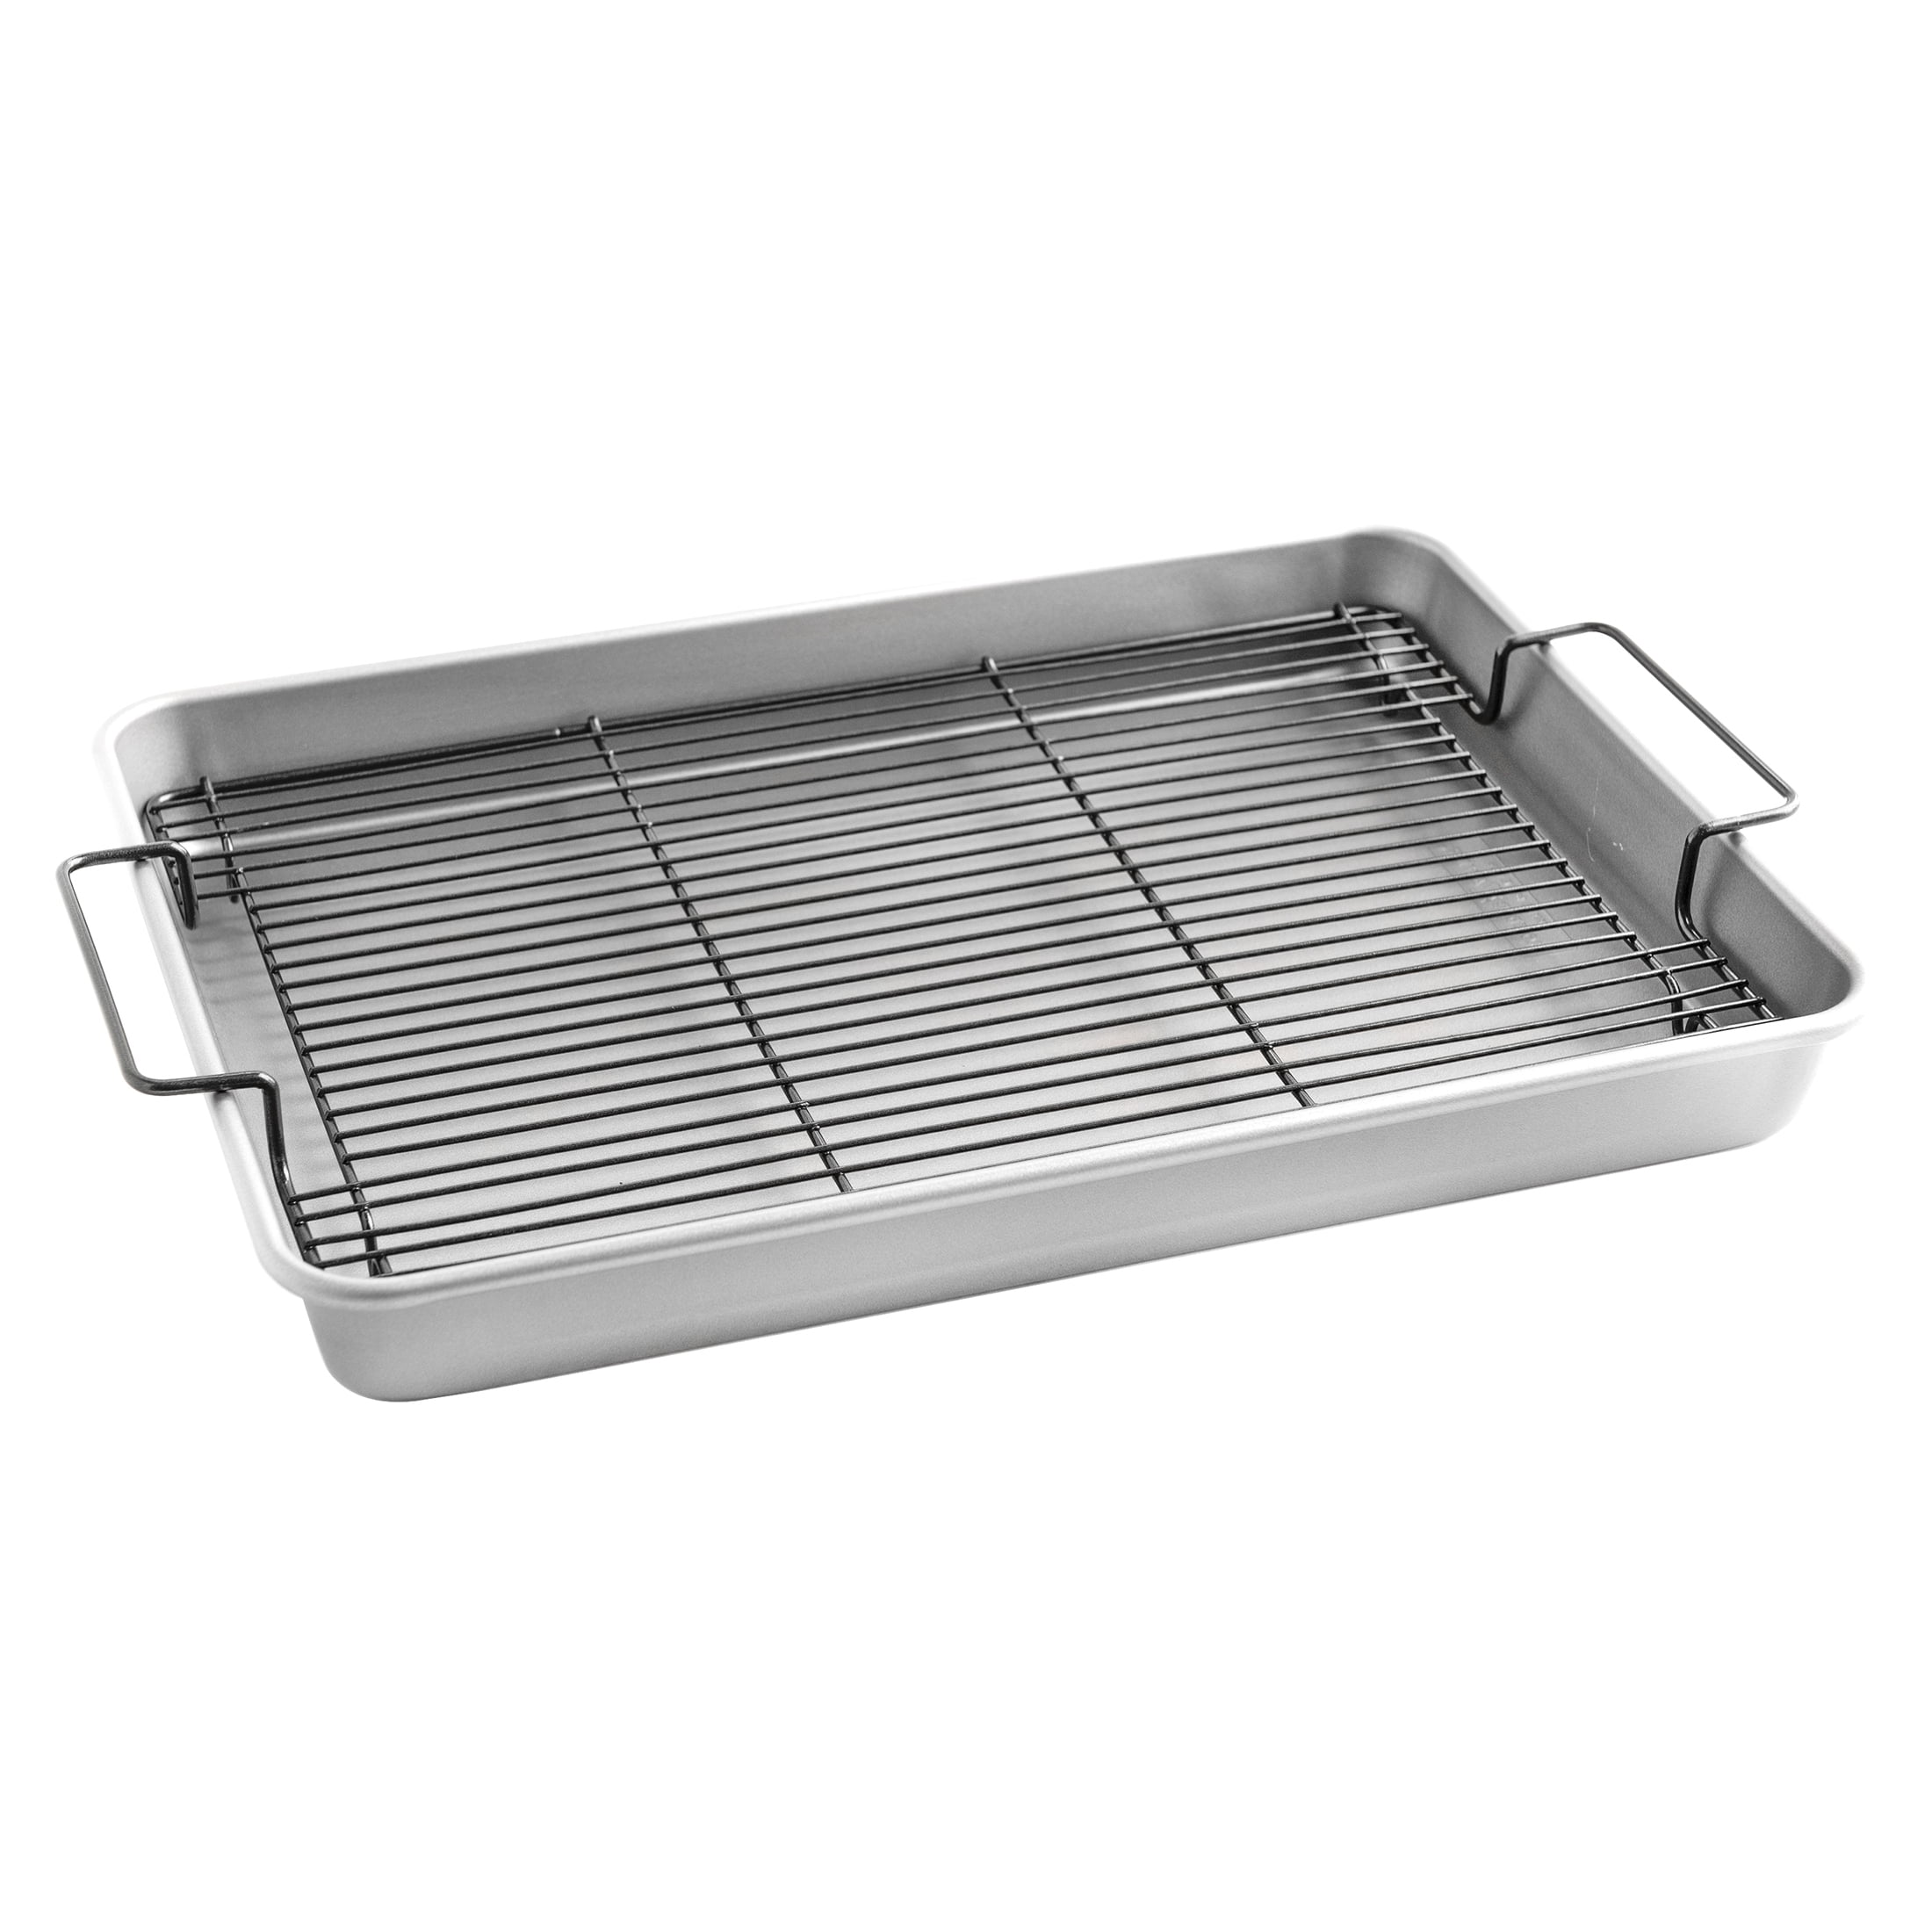 Nordic Ware 21 1/8 x 15 13/16 x 2 5/16 Aluminum Roasting Pan with Non-Stick Carbon Steel Rack 35702